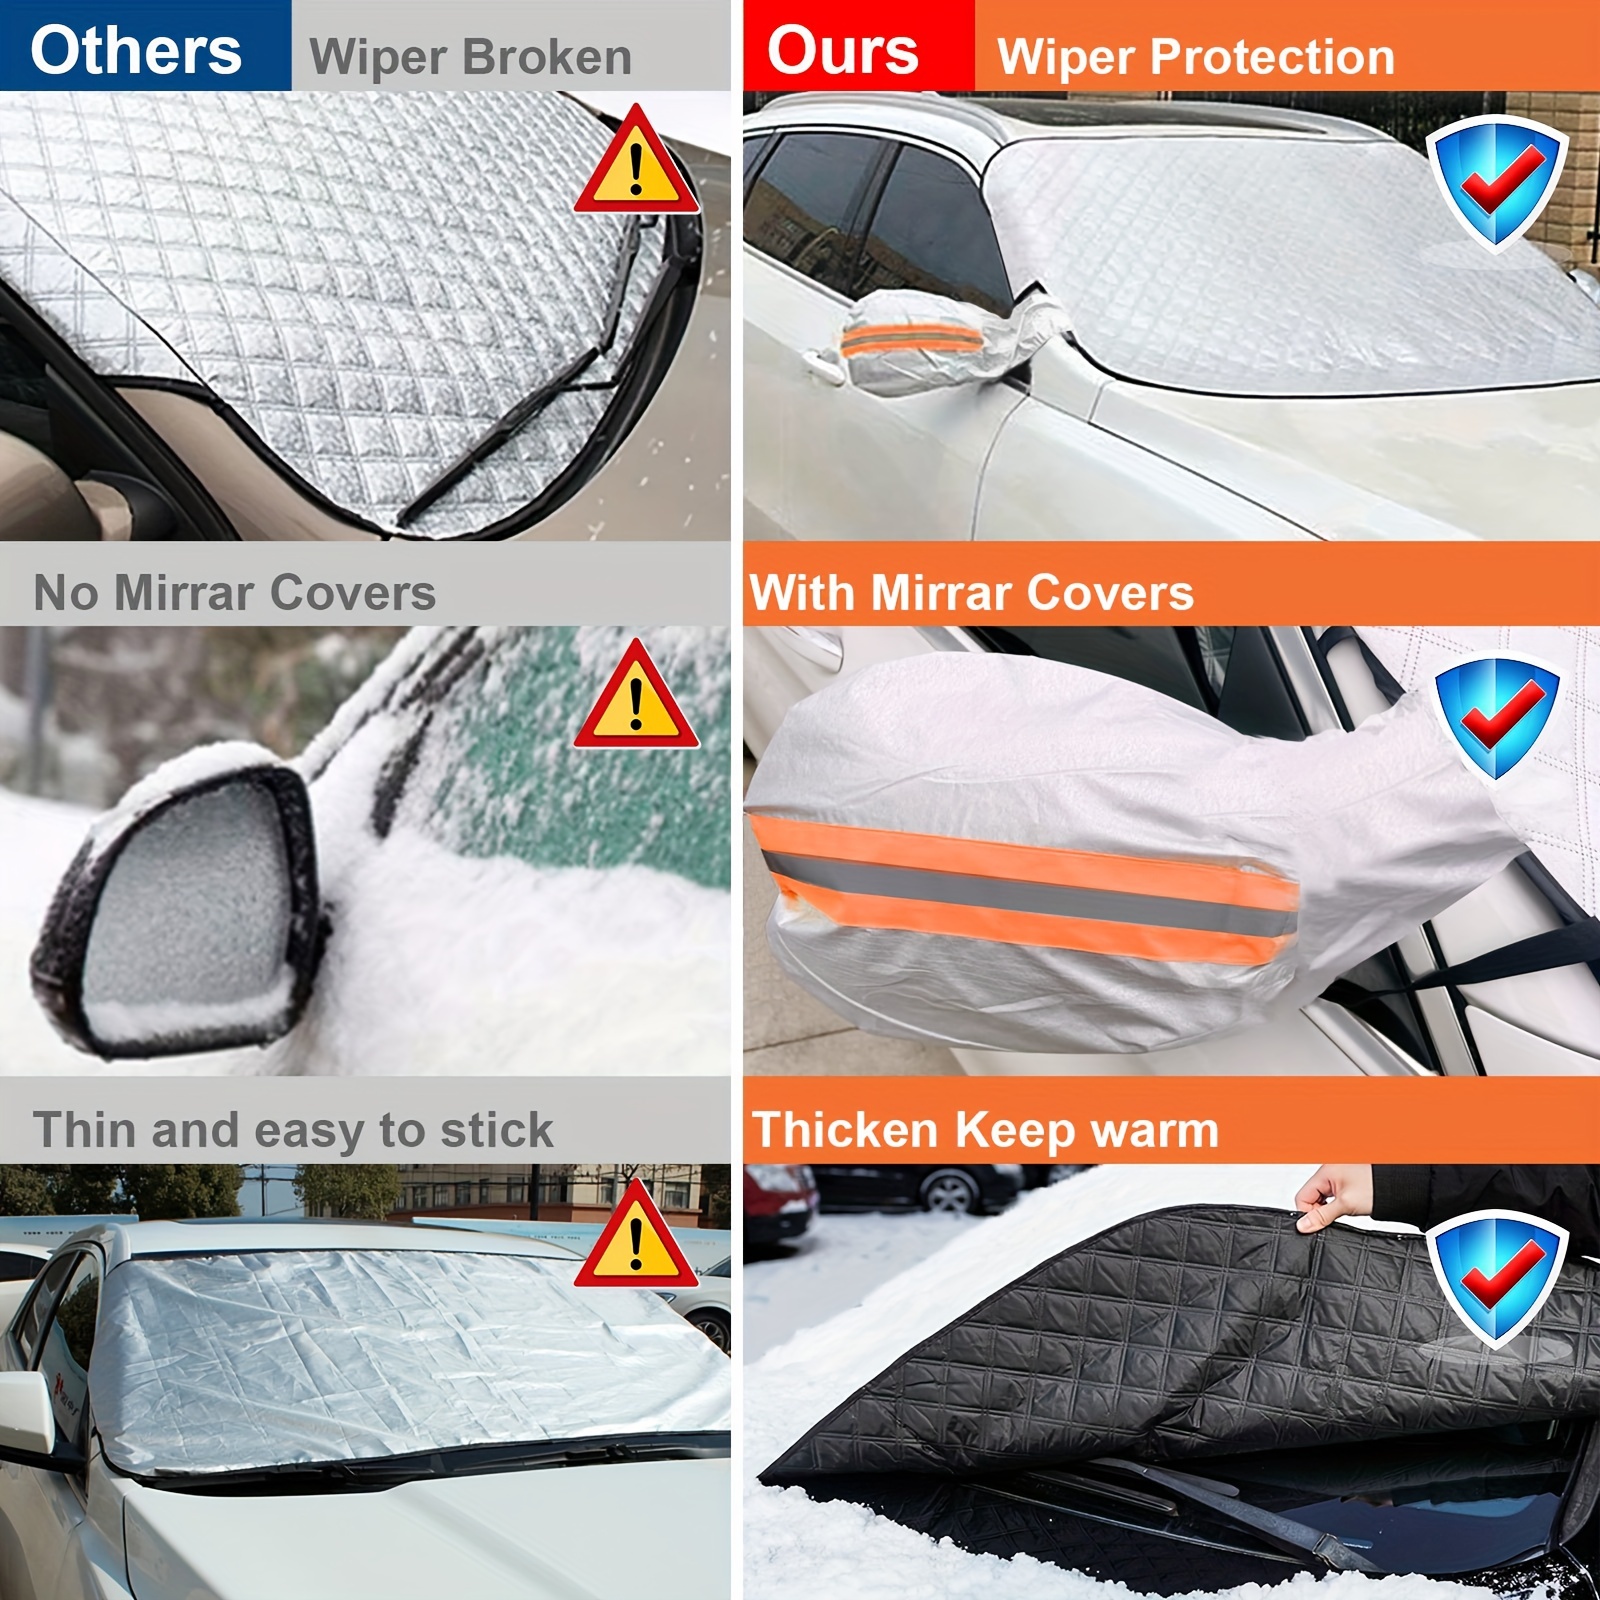 FENNVV Windshield Cover for Ice and Snow, Car Windshield Snow Cover with  Wiper & Mirror Protector, Winter Car Accessories for Windshield Protection